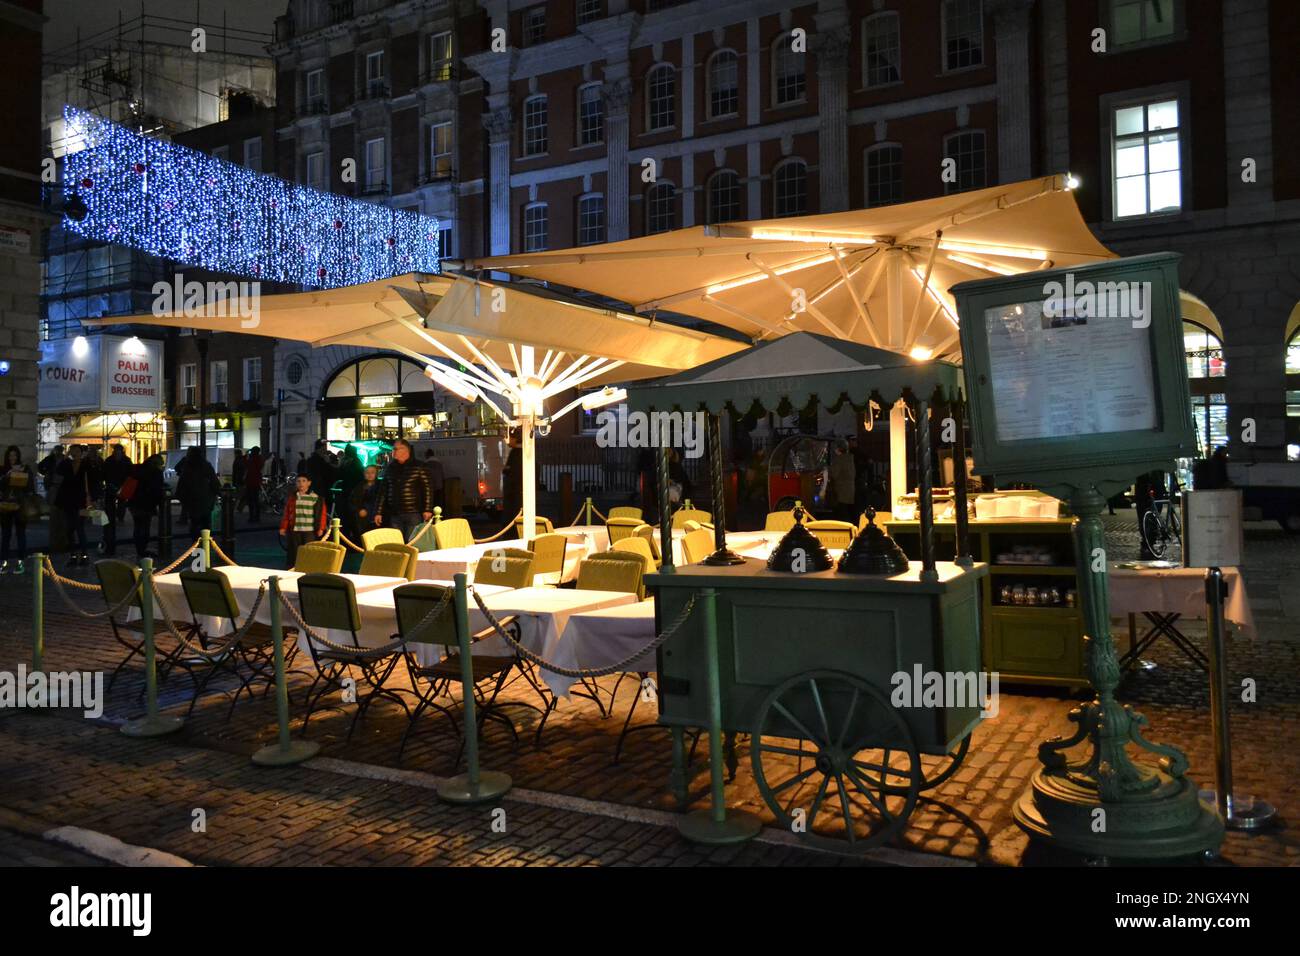 Covent Garden 'Laduree' cafe outdoor interior waiting to be opened with beautiful LED lights decoration of the square in dark hour. Stock Photo